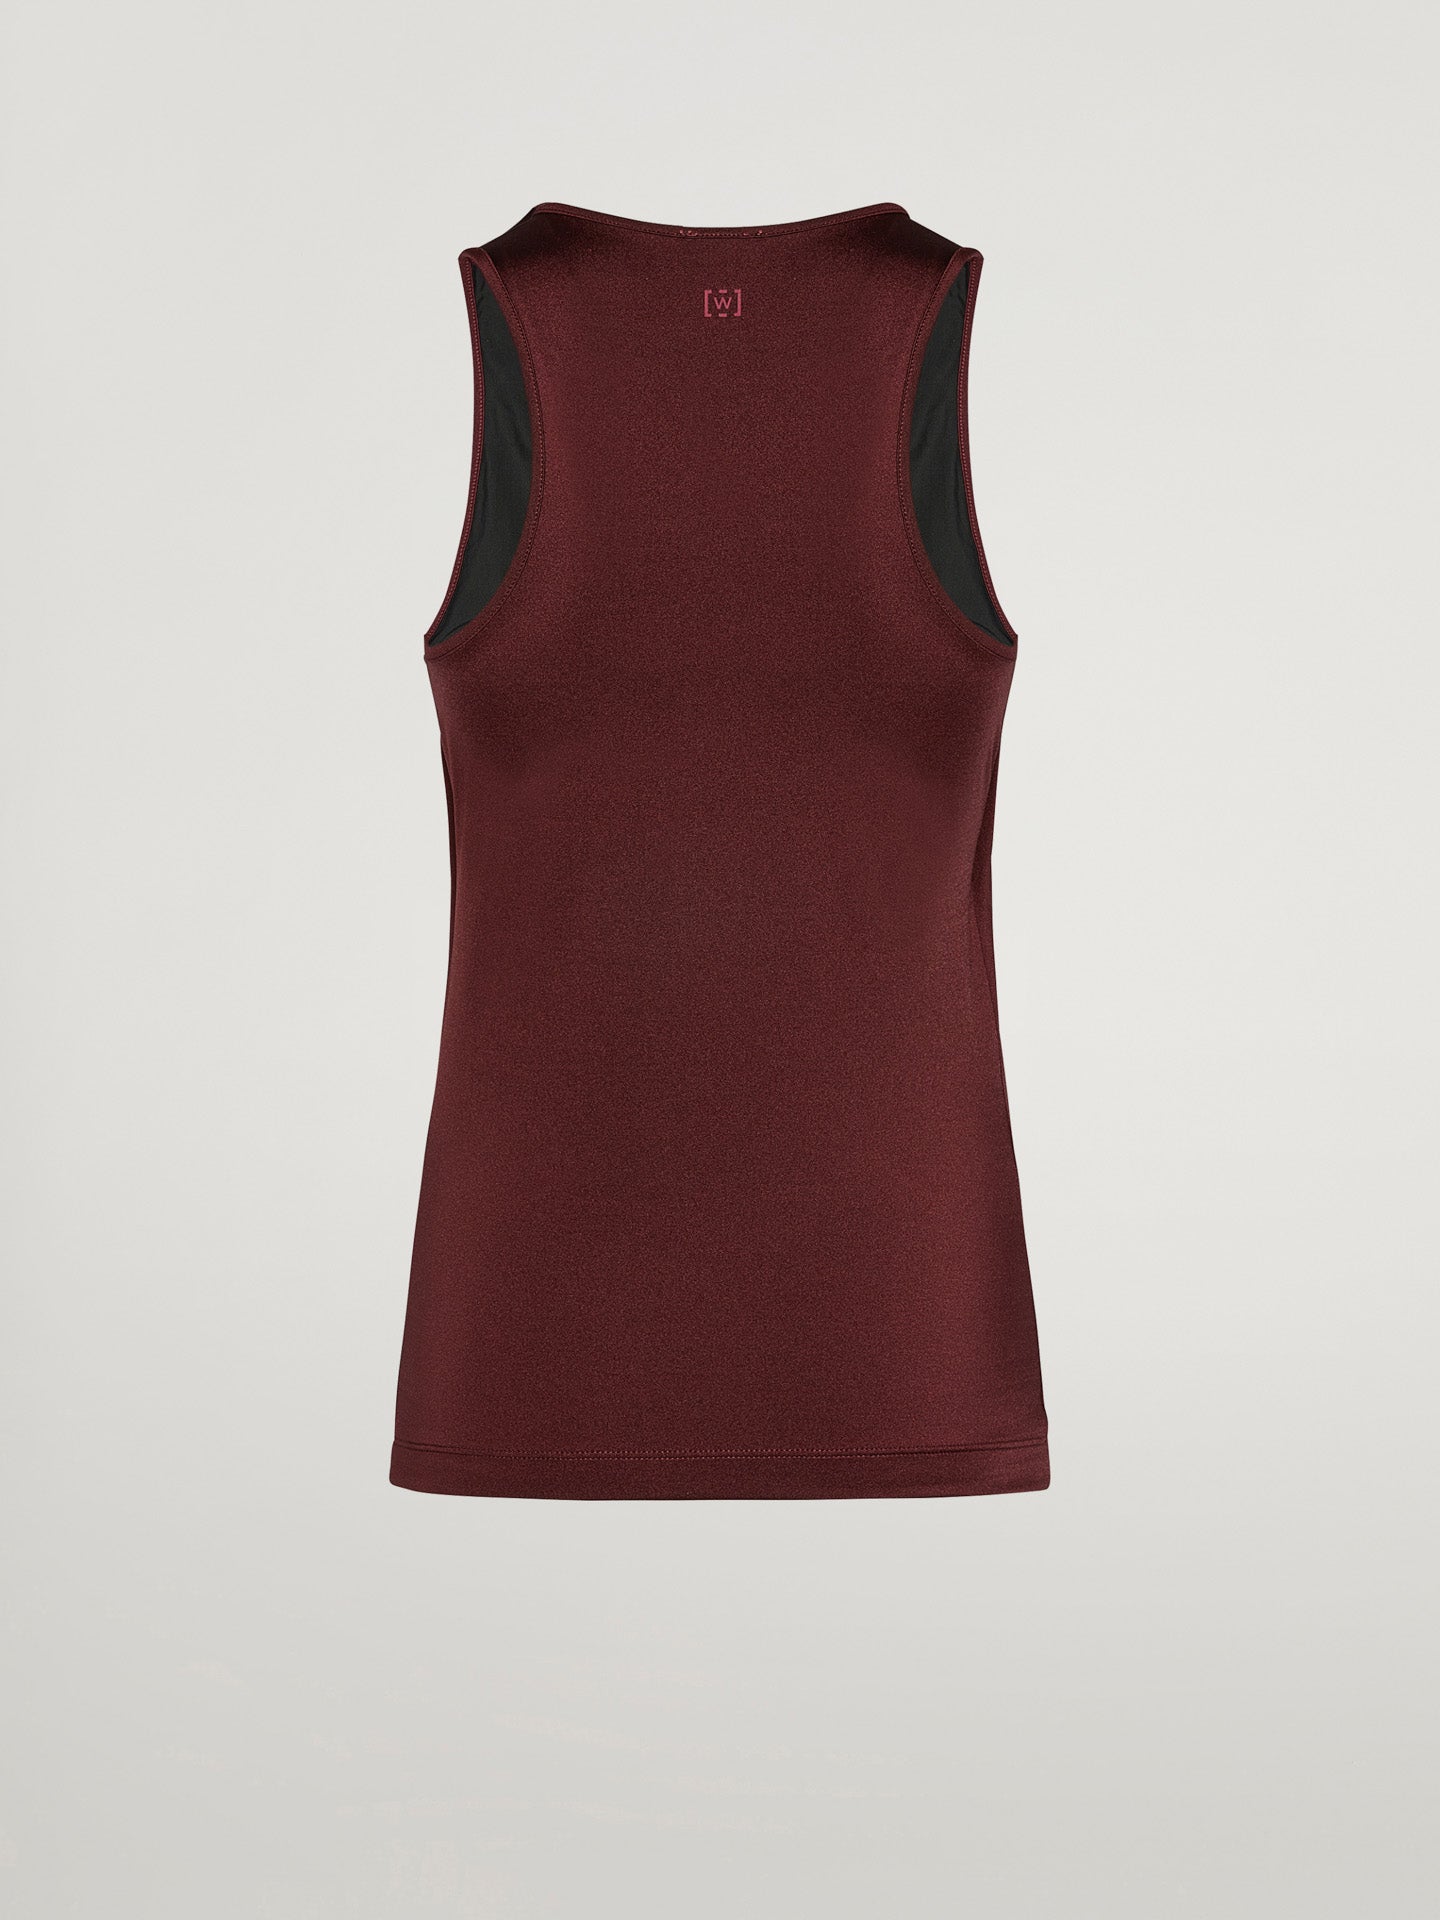 The Workout Top Sleeveless